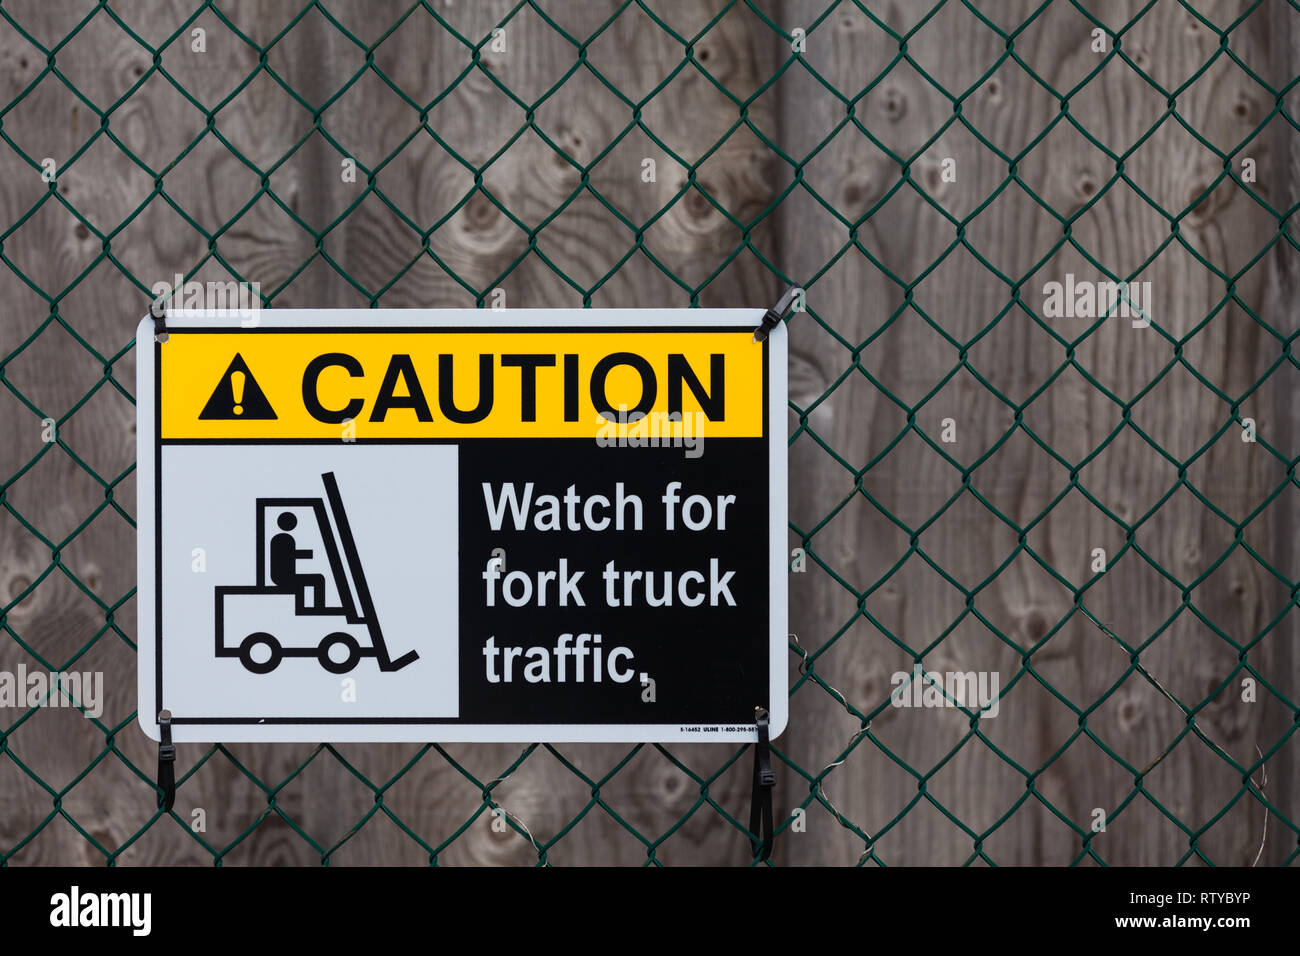 Fork lift truck warning sign secured to a fence Stock Photo